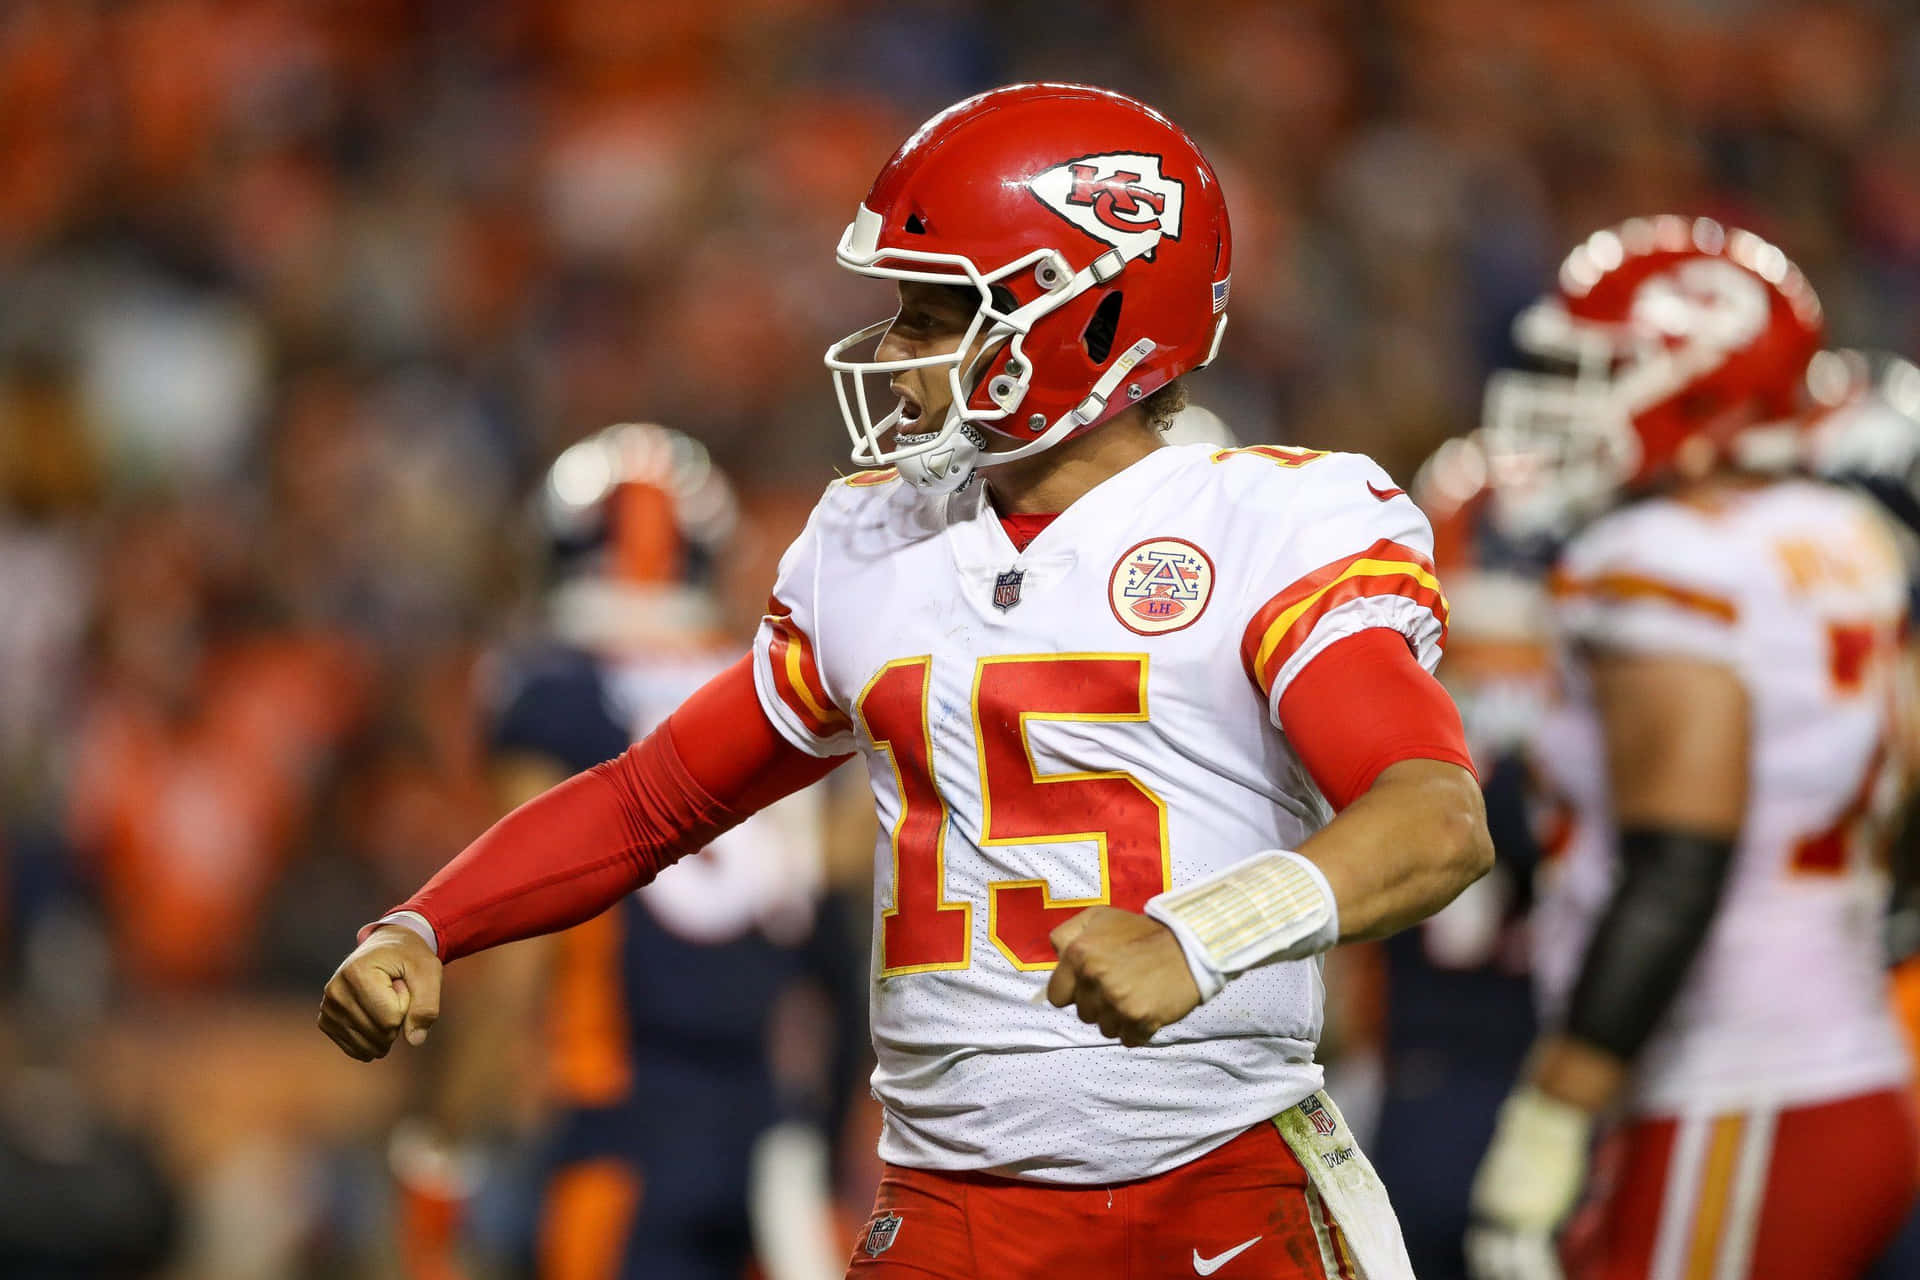 Patrick Mahomes in action during a football game